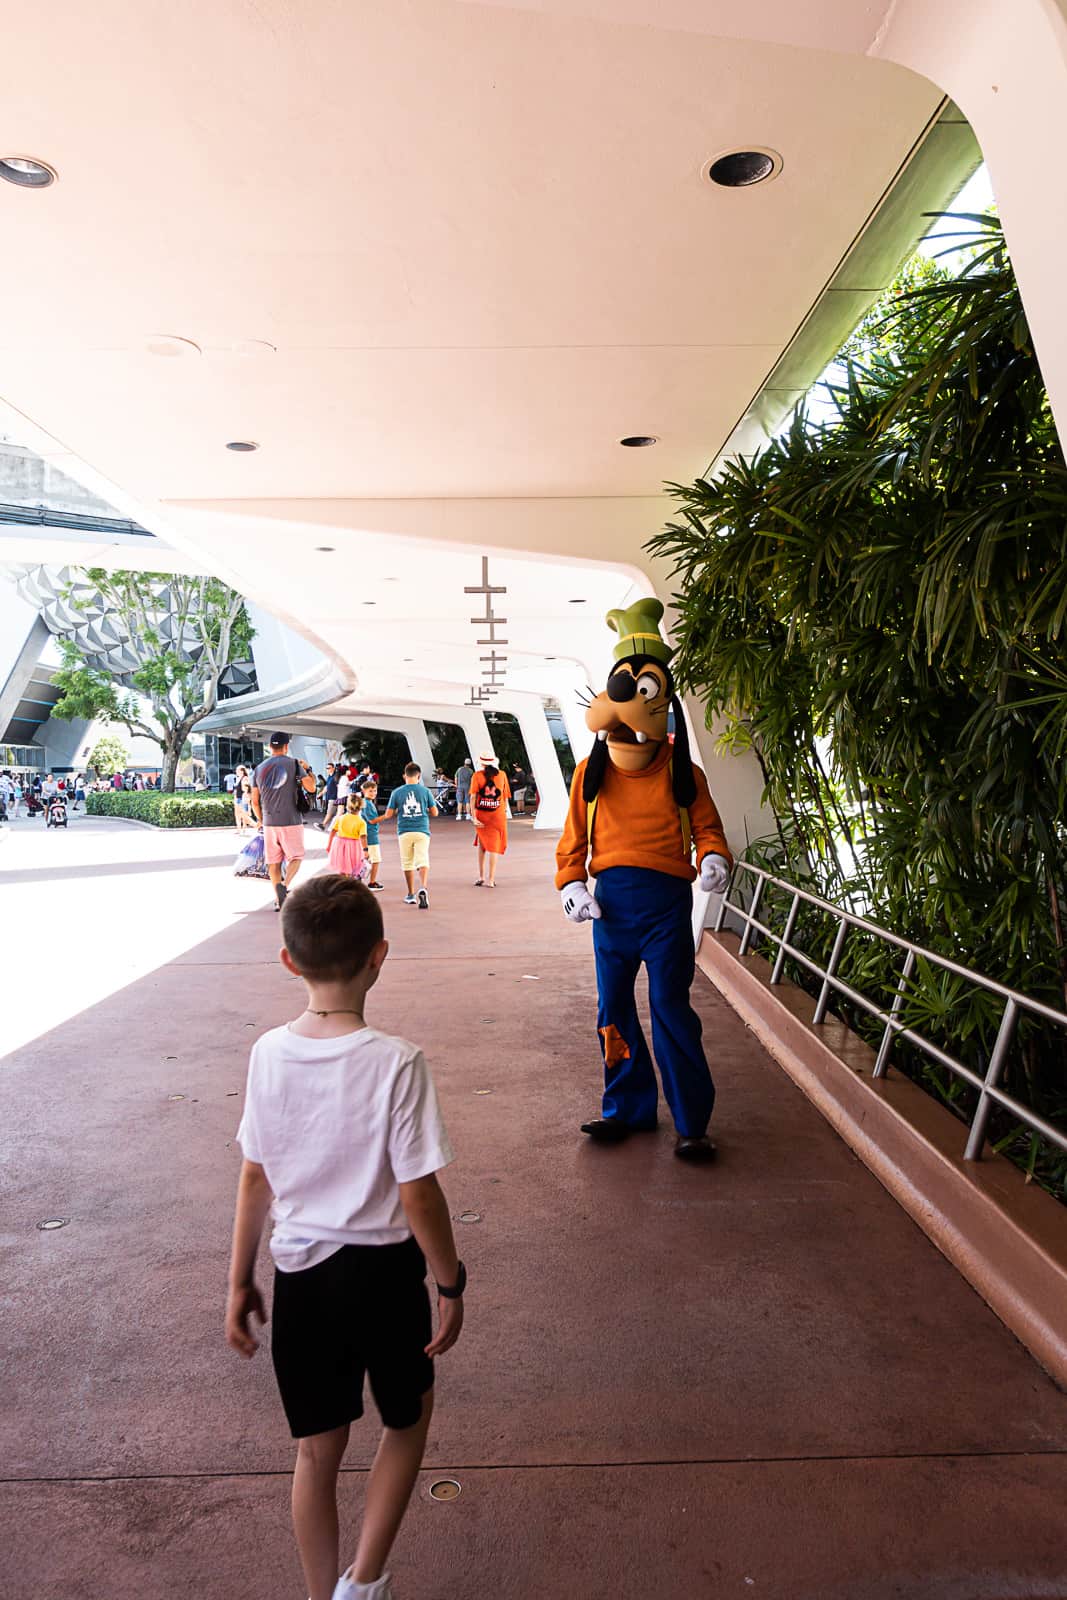 Arriving at attraction where Goofy meet and greet is located at Disney World